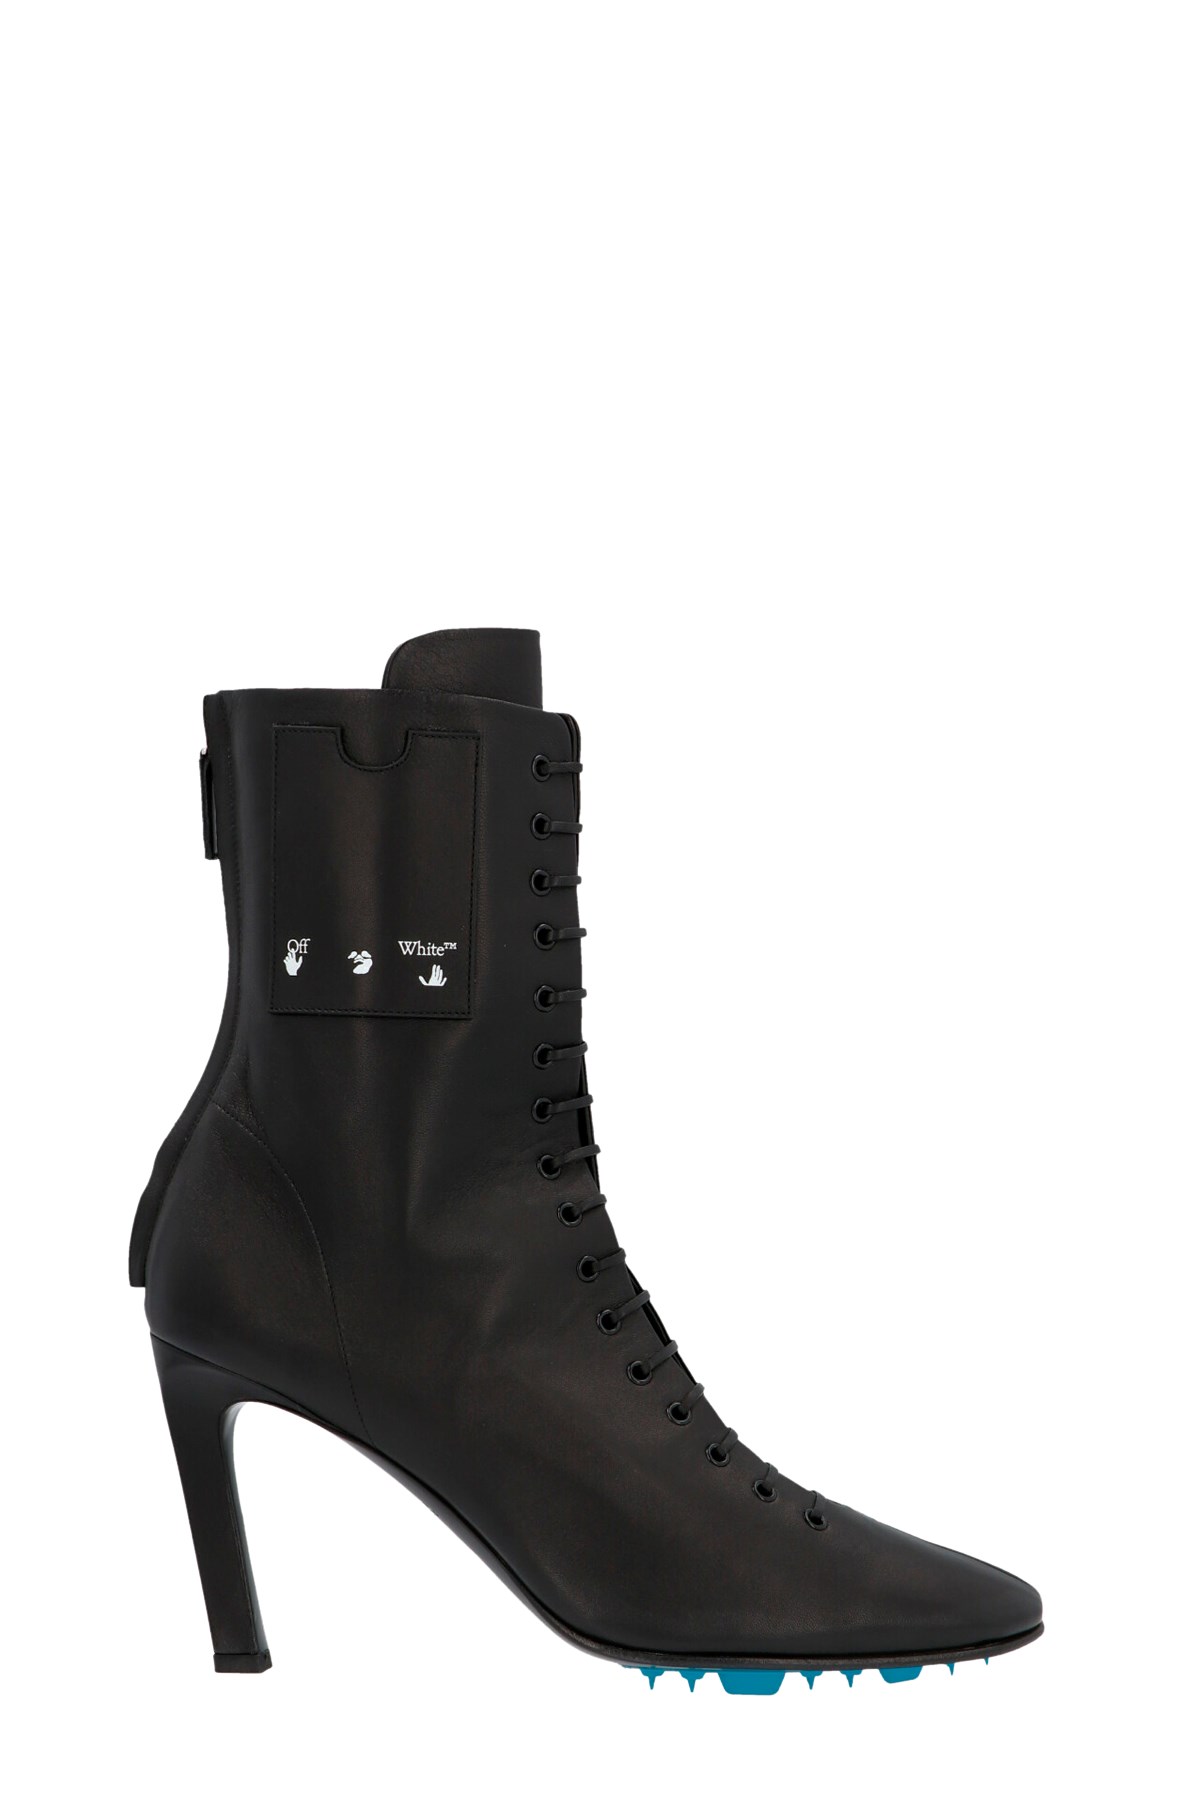 OFF-WHITE Logo Ankle Boots